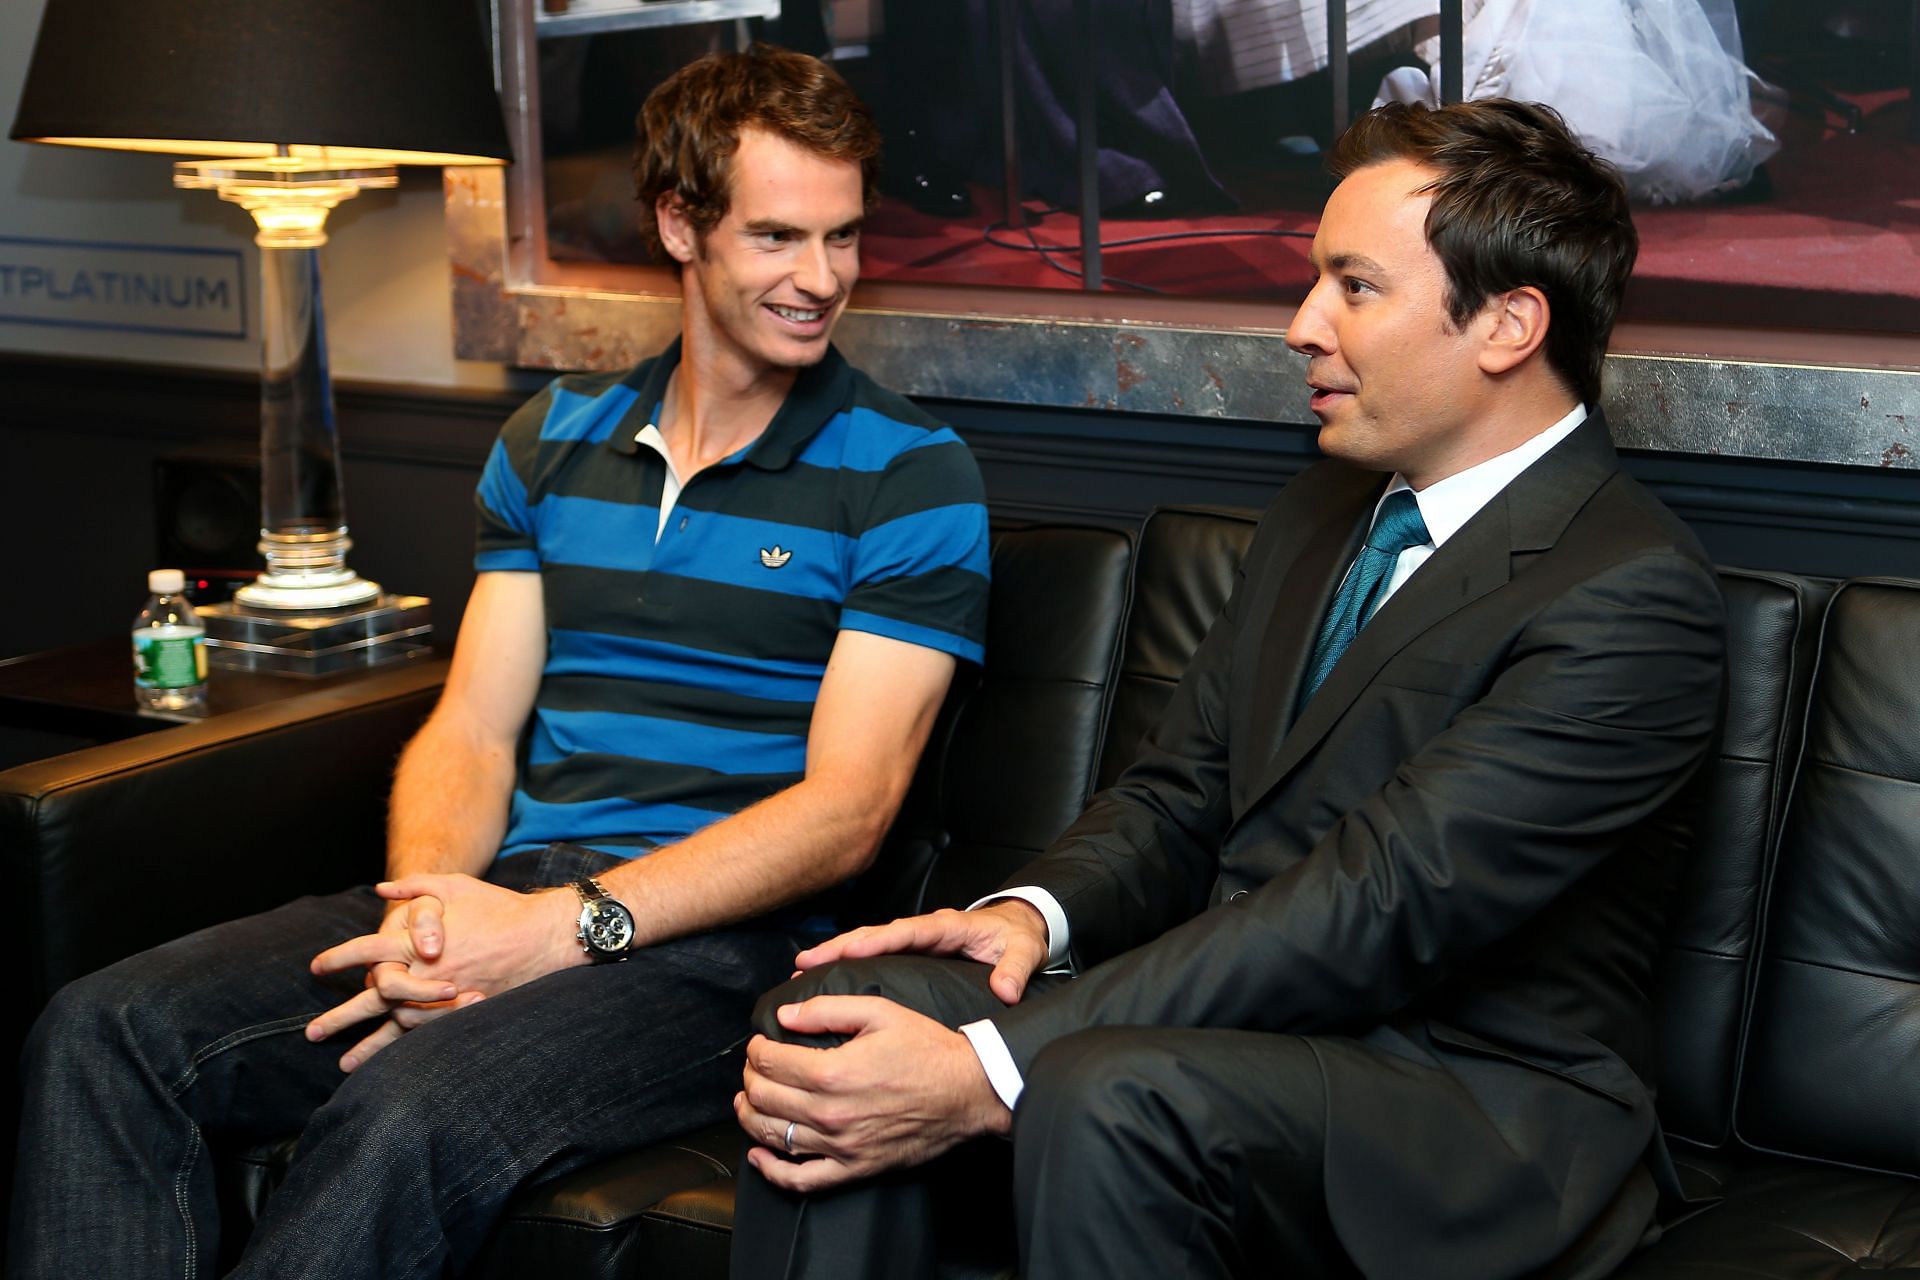 Jimmy Fallon with the 2012 US Open Champion Andy Murray for the New York City Trophy Tour